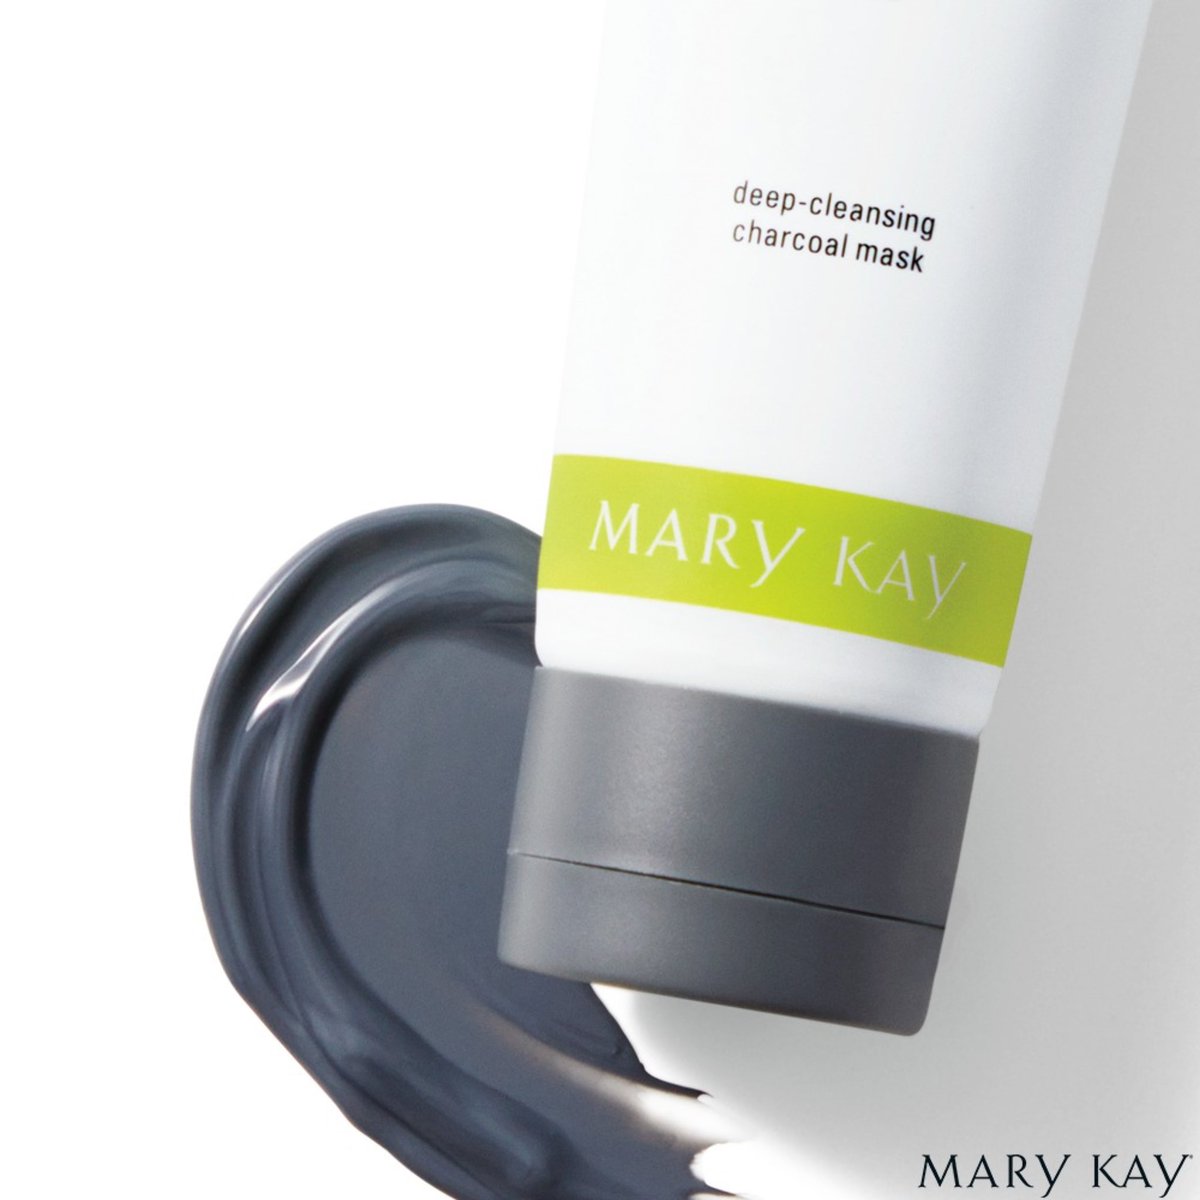 It’s Friday!!! Who’s ready for the weekend?! Spend some time pampering yourself with #MaryKay!